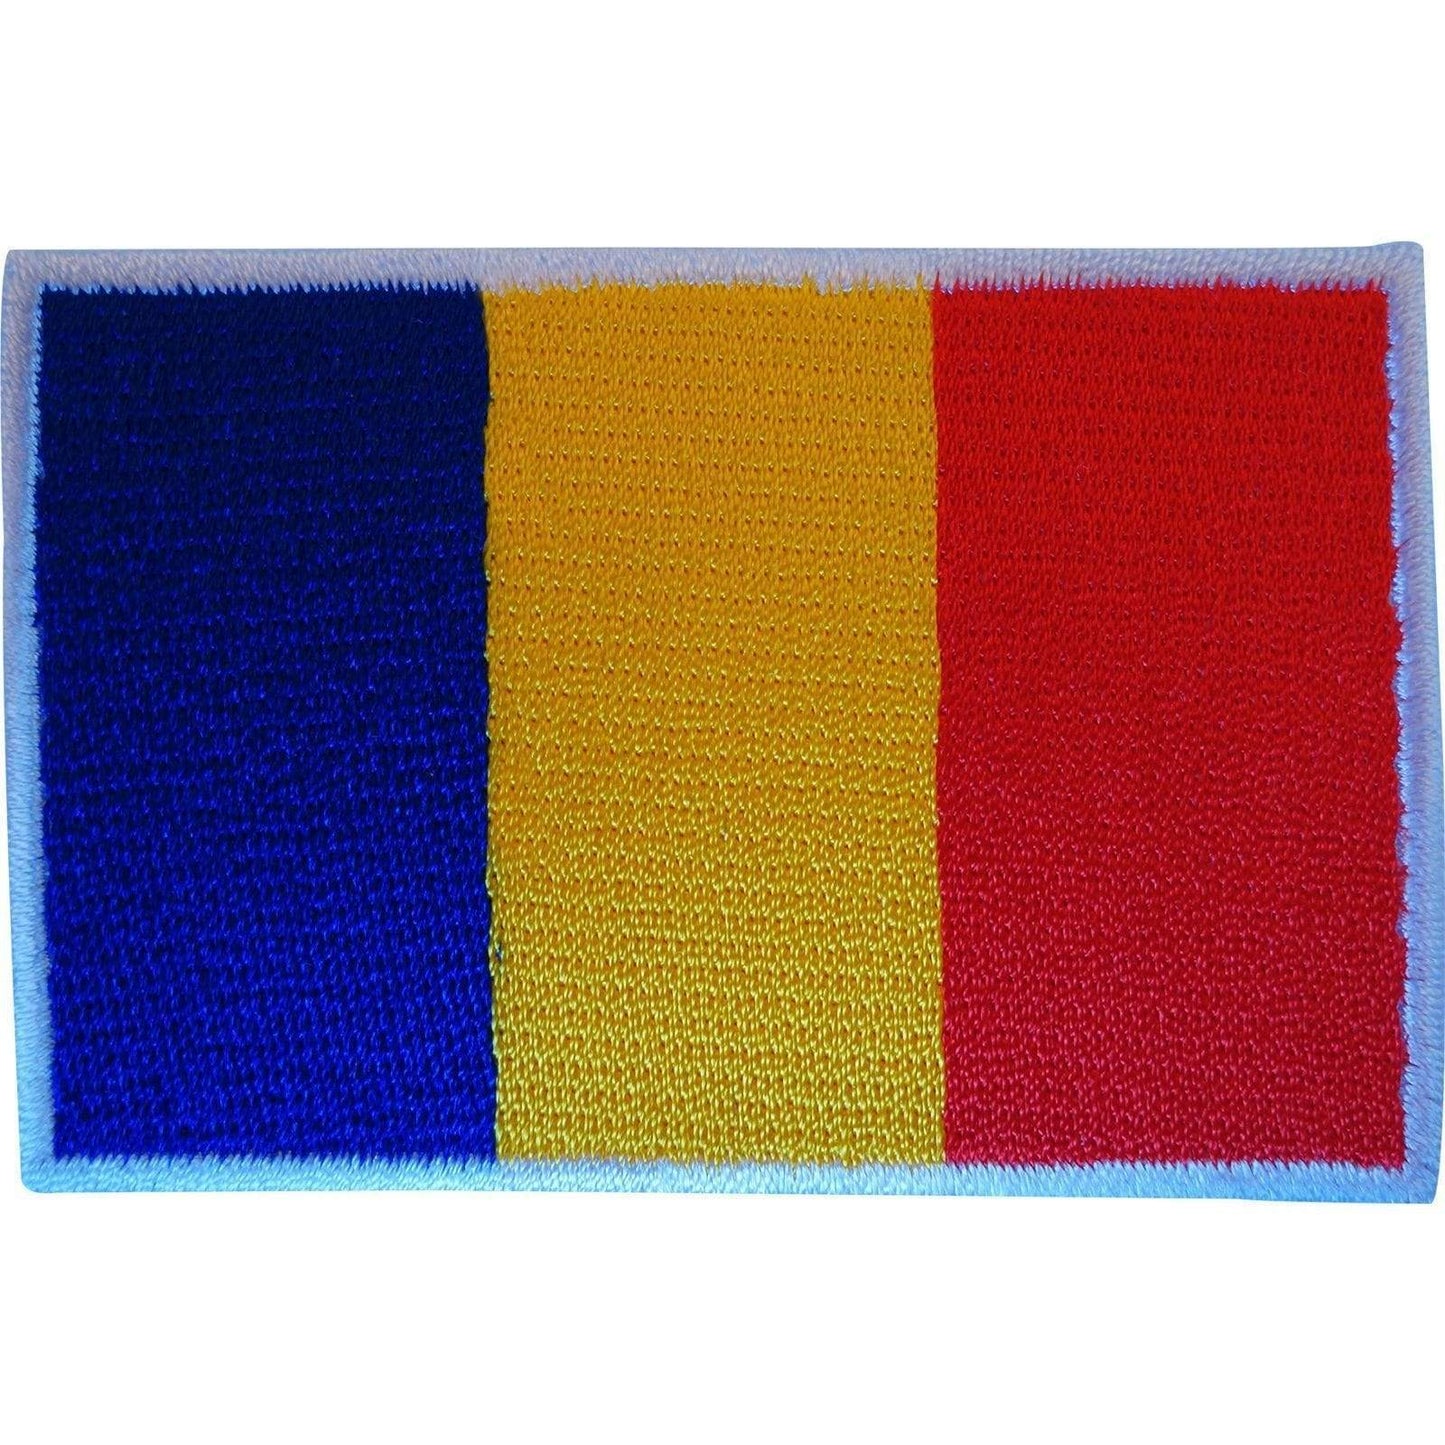 Romania Flag Patch Romanian Iron On Sew On Badge Clothes Embroidered Applique